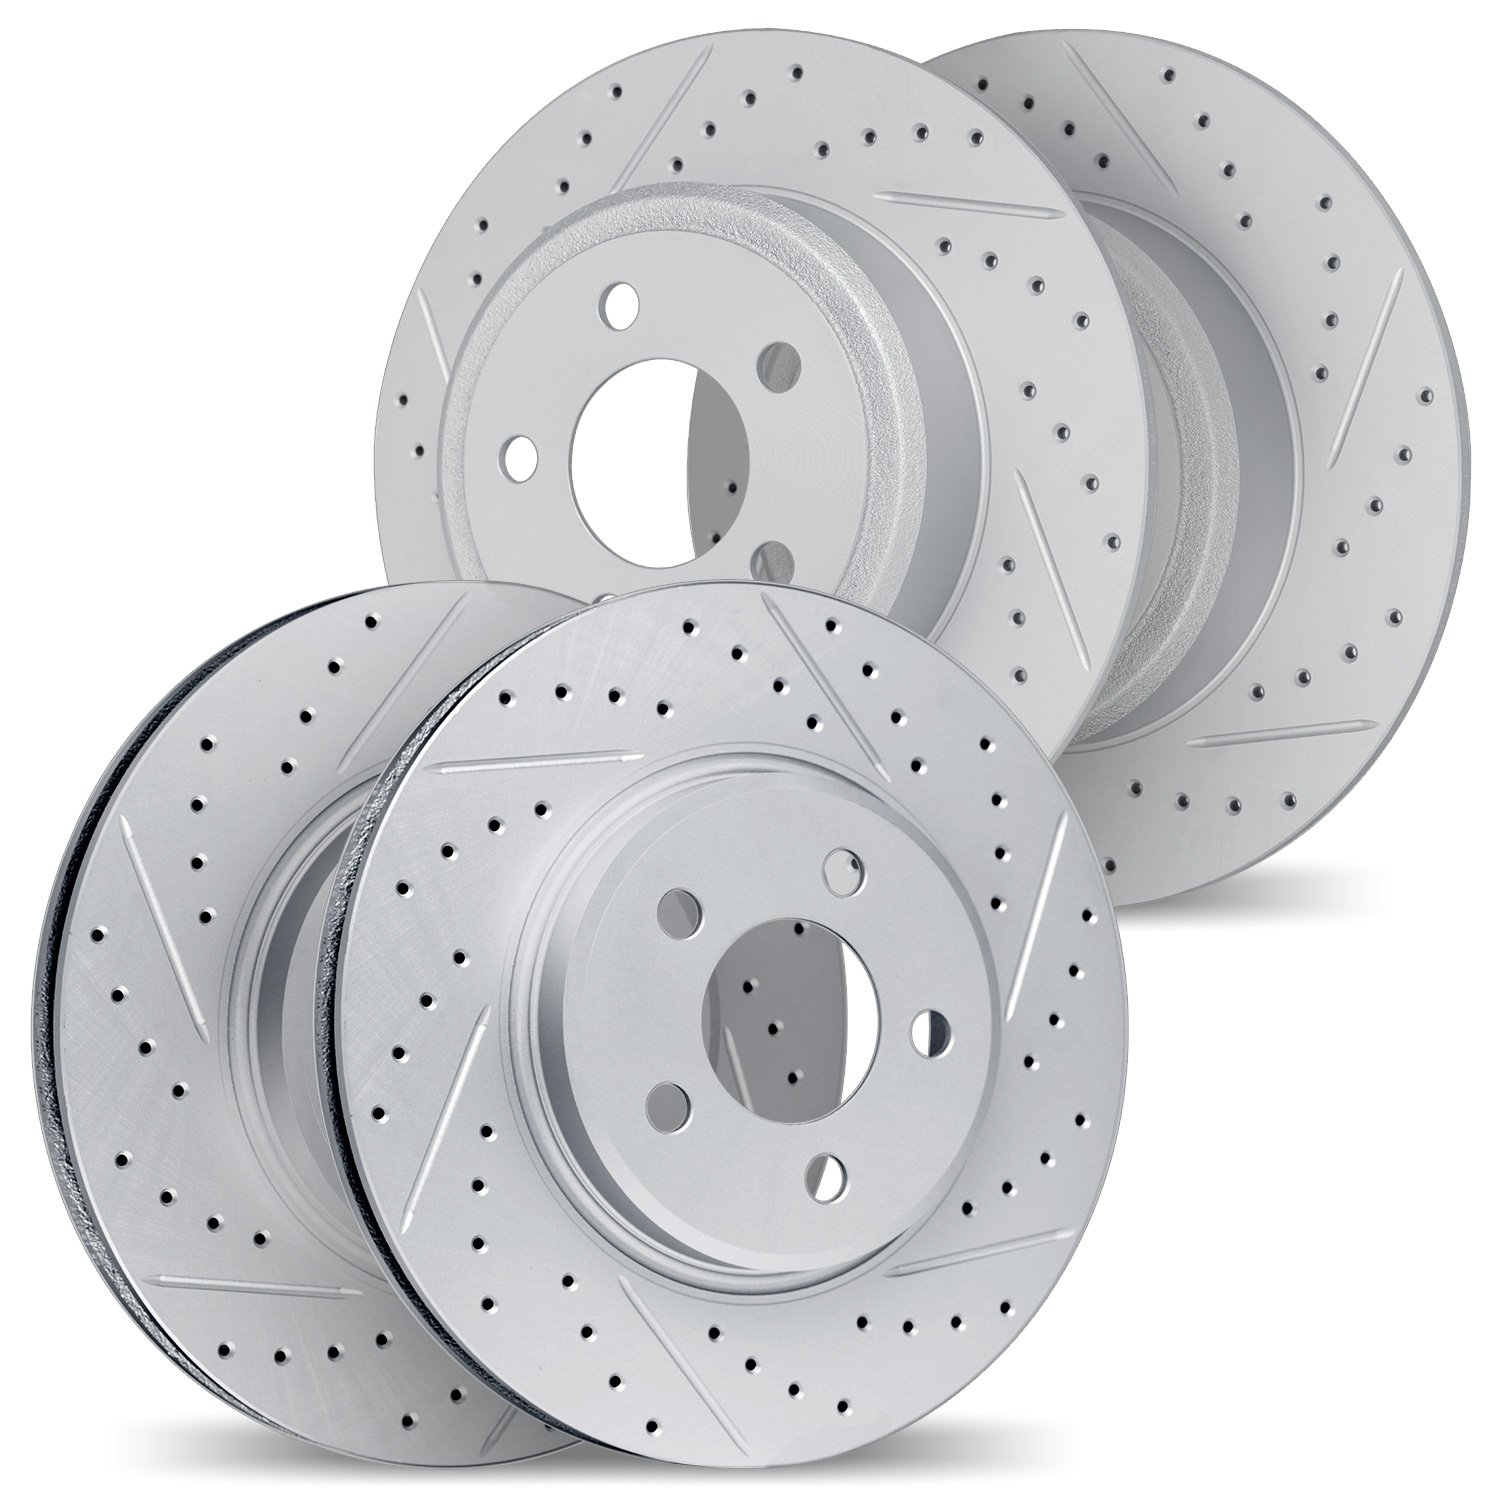 2004-27017 Geoperformance Drilled/Slotted Brake Rotors, 2008-2018 Volvo, Position: Front and Rear